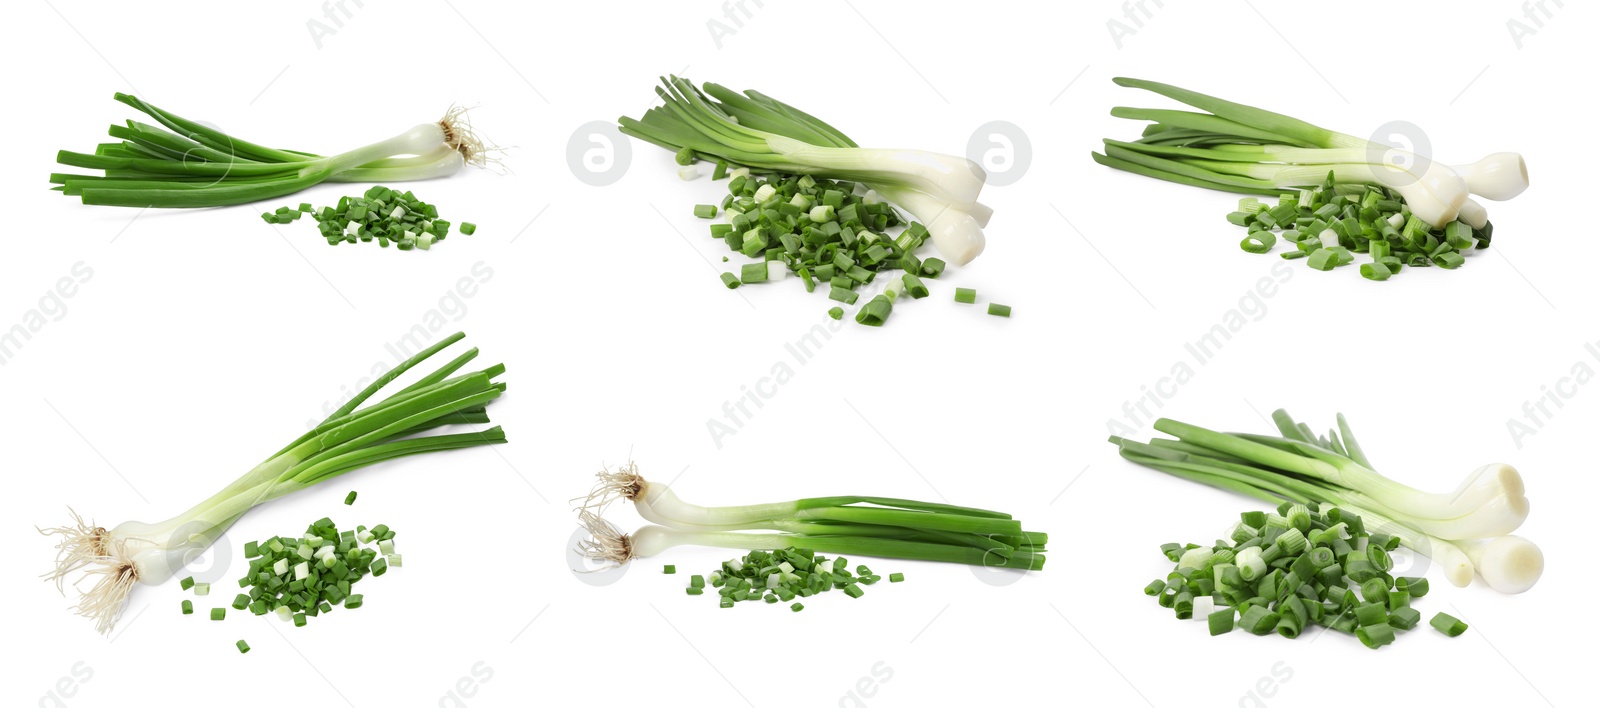 Image of Collage of chopped and whole green onions on white background